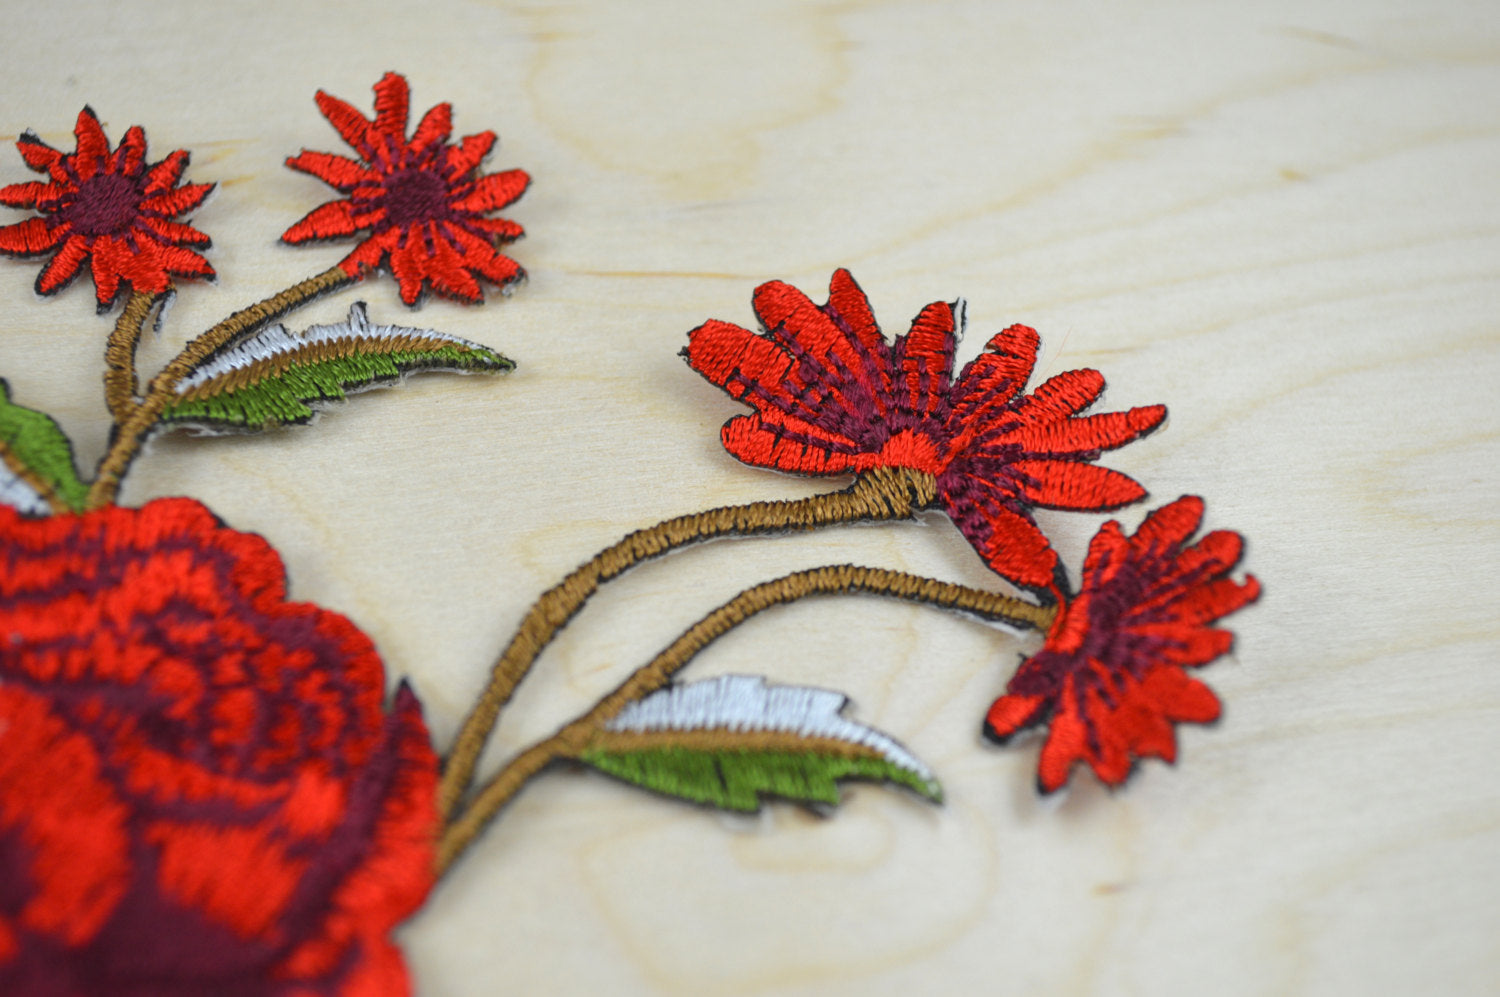 1 Realistic Red Motif of Rose in Bush Embroidery Patch